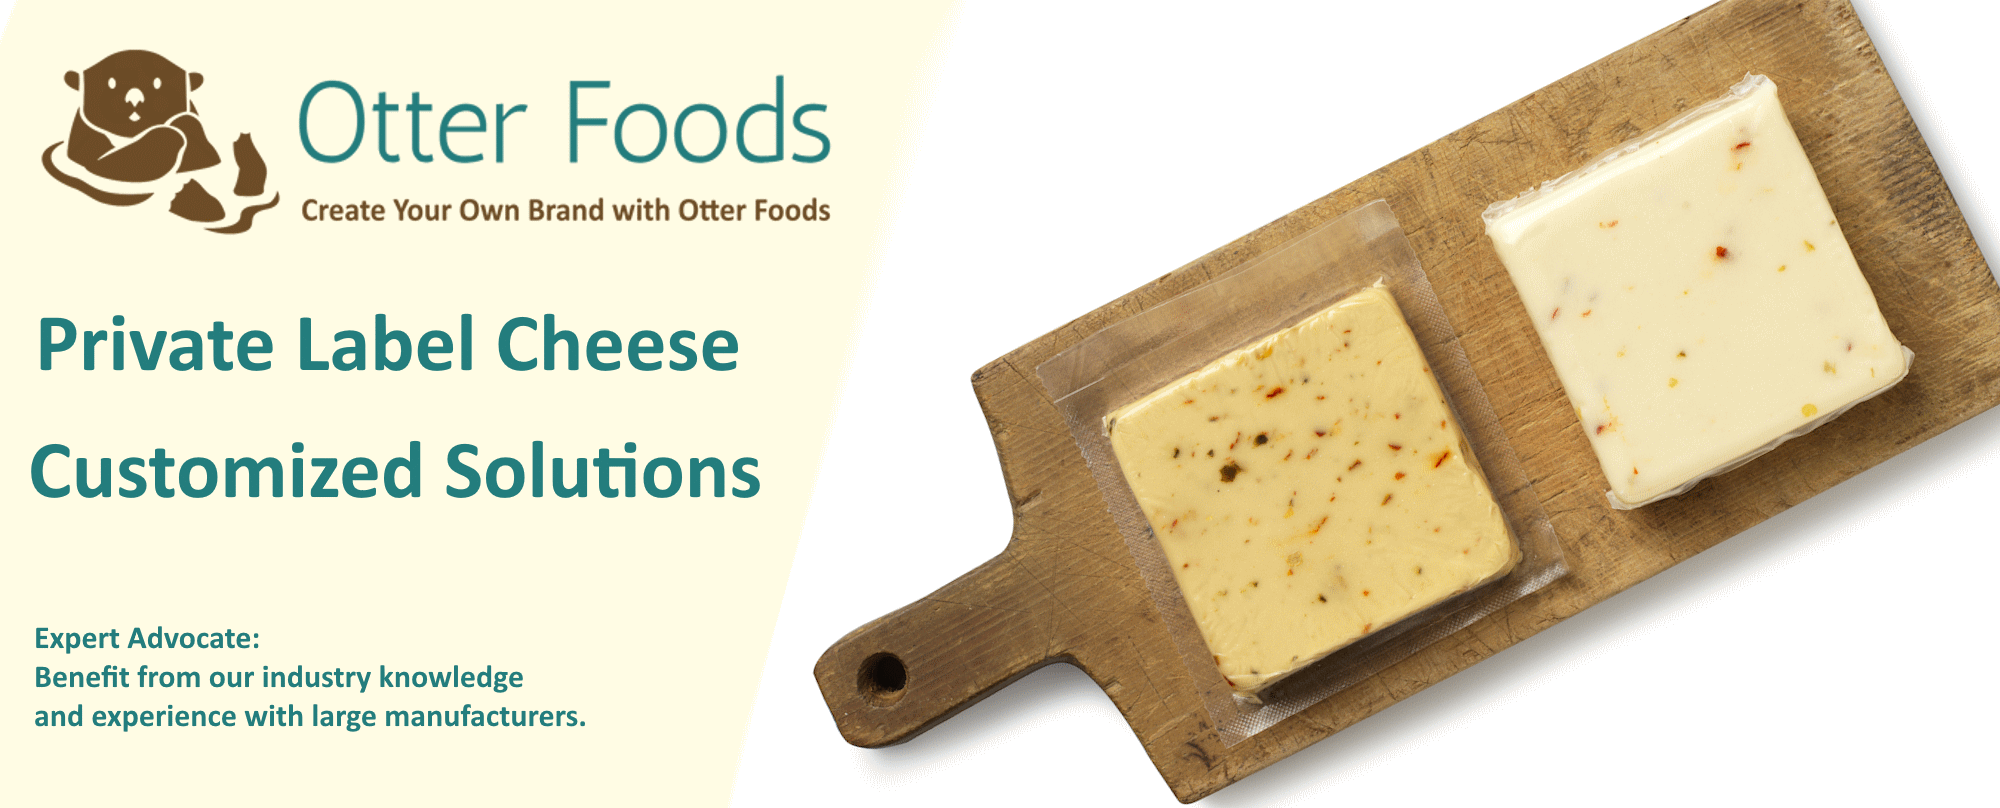 private label cheese and custom cheese brands offered by Otter Foods